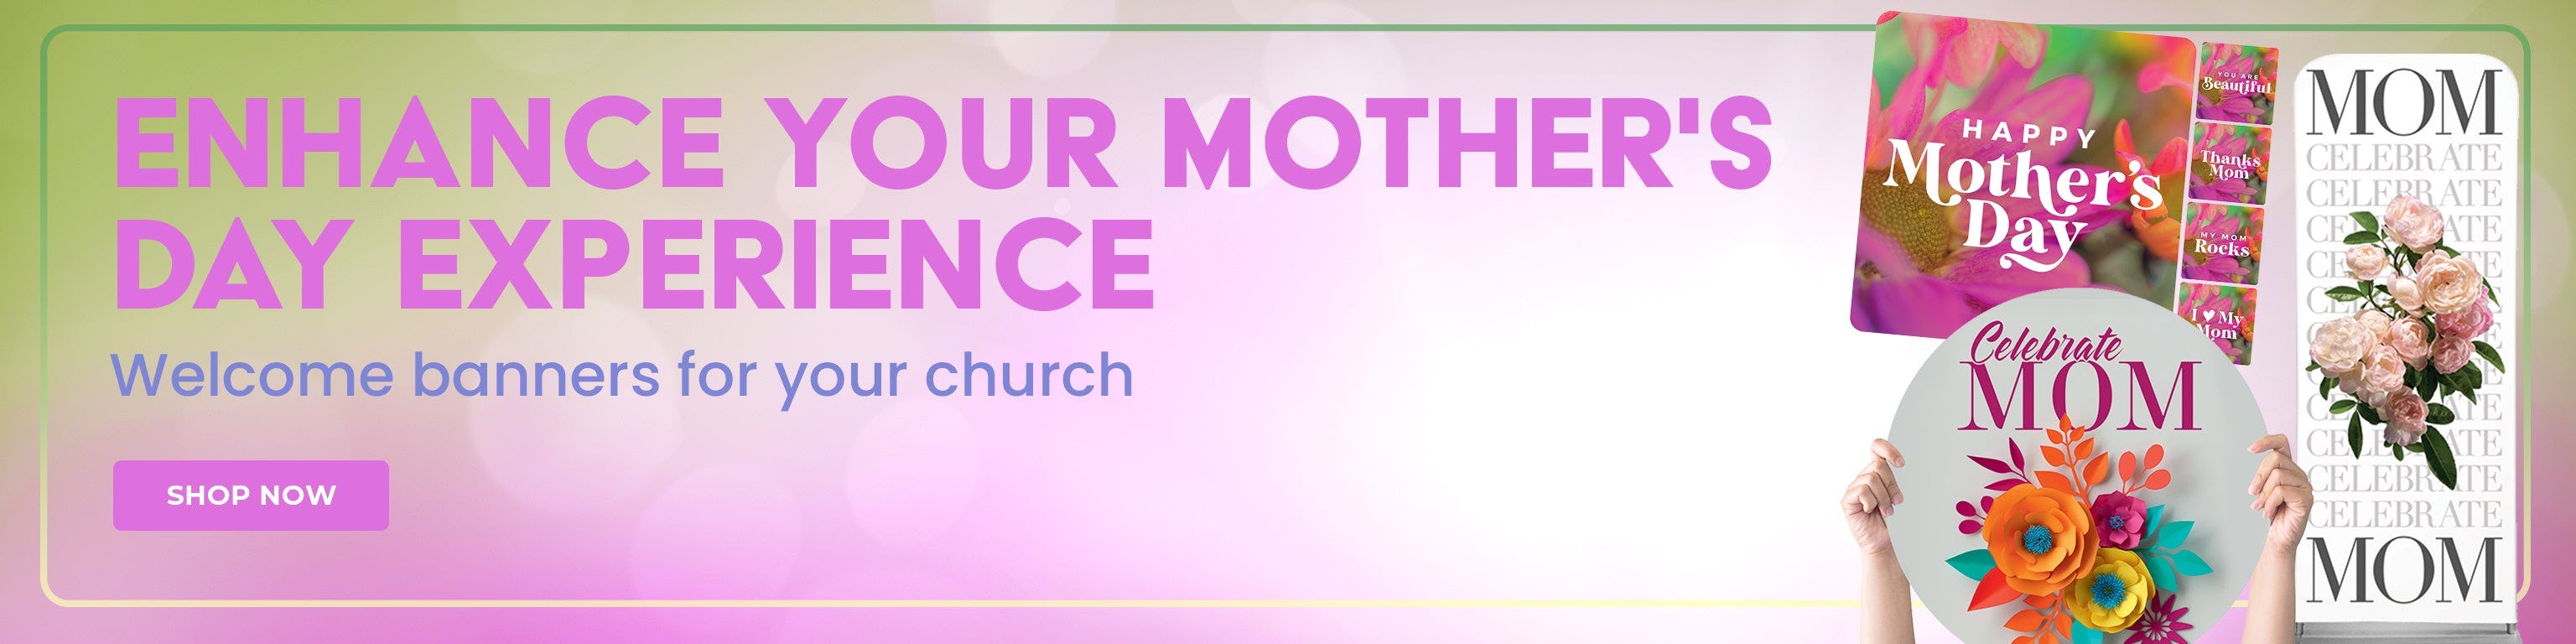 Brighten Up Your Church this Mother’s Day